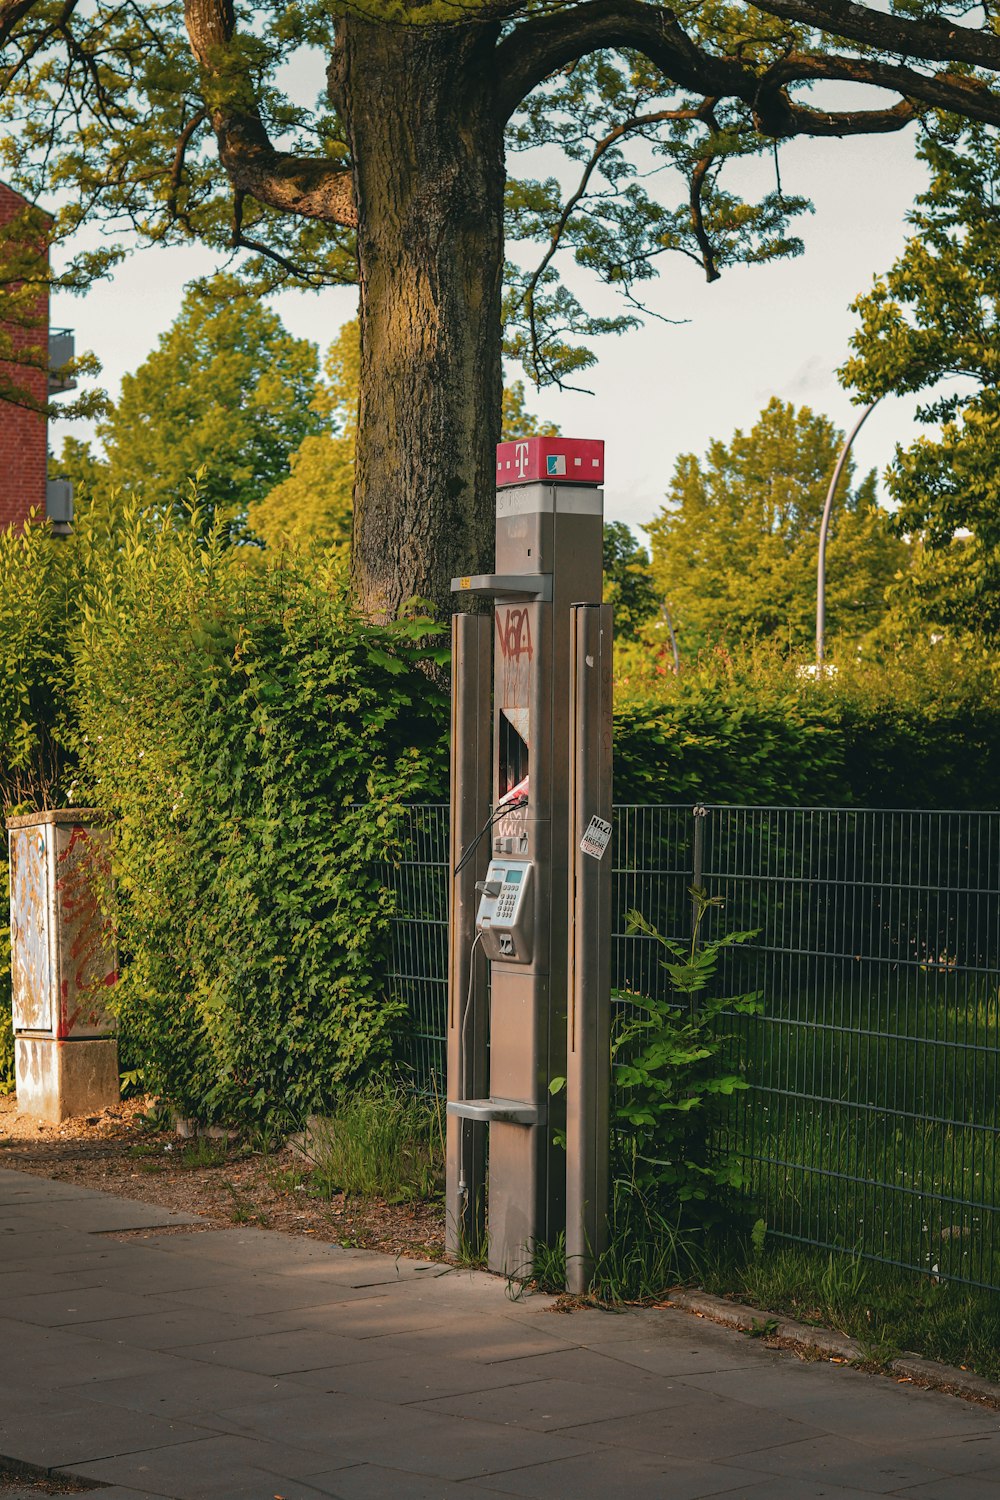 a phone booth sitting on the side of a road